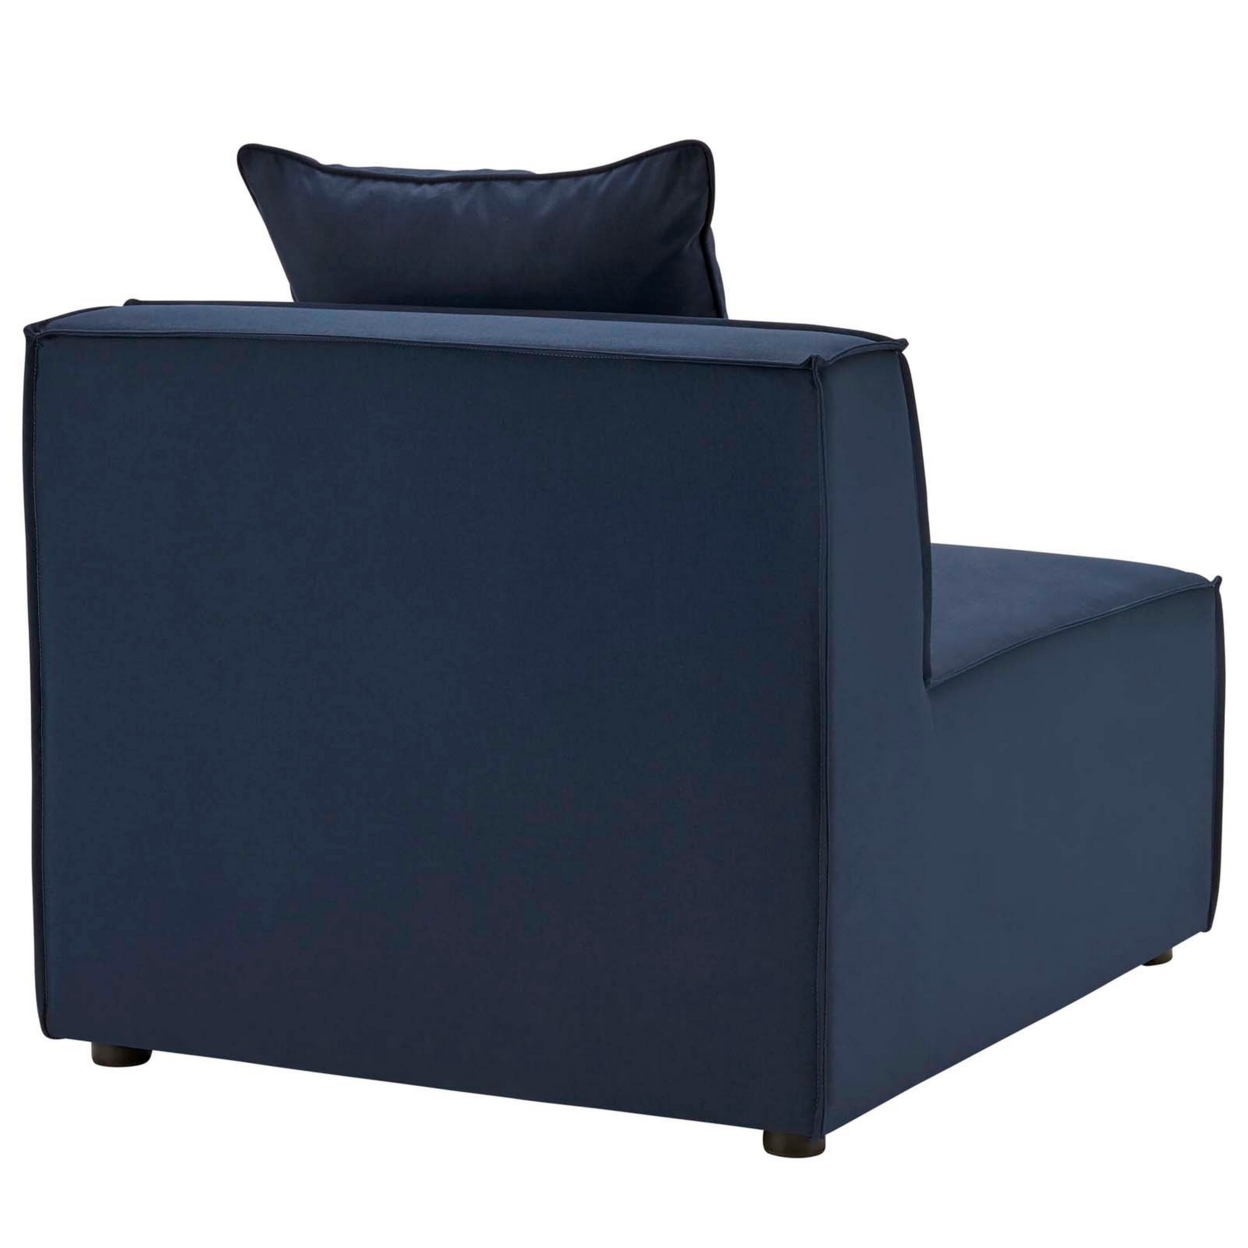 Saybrook Outdoor Patio Upholstered Sectional Sofa Armless Chair, Navy Blue